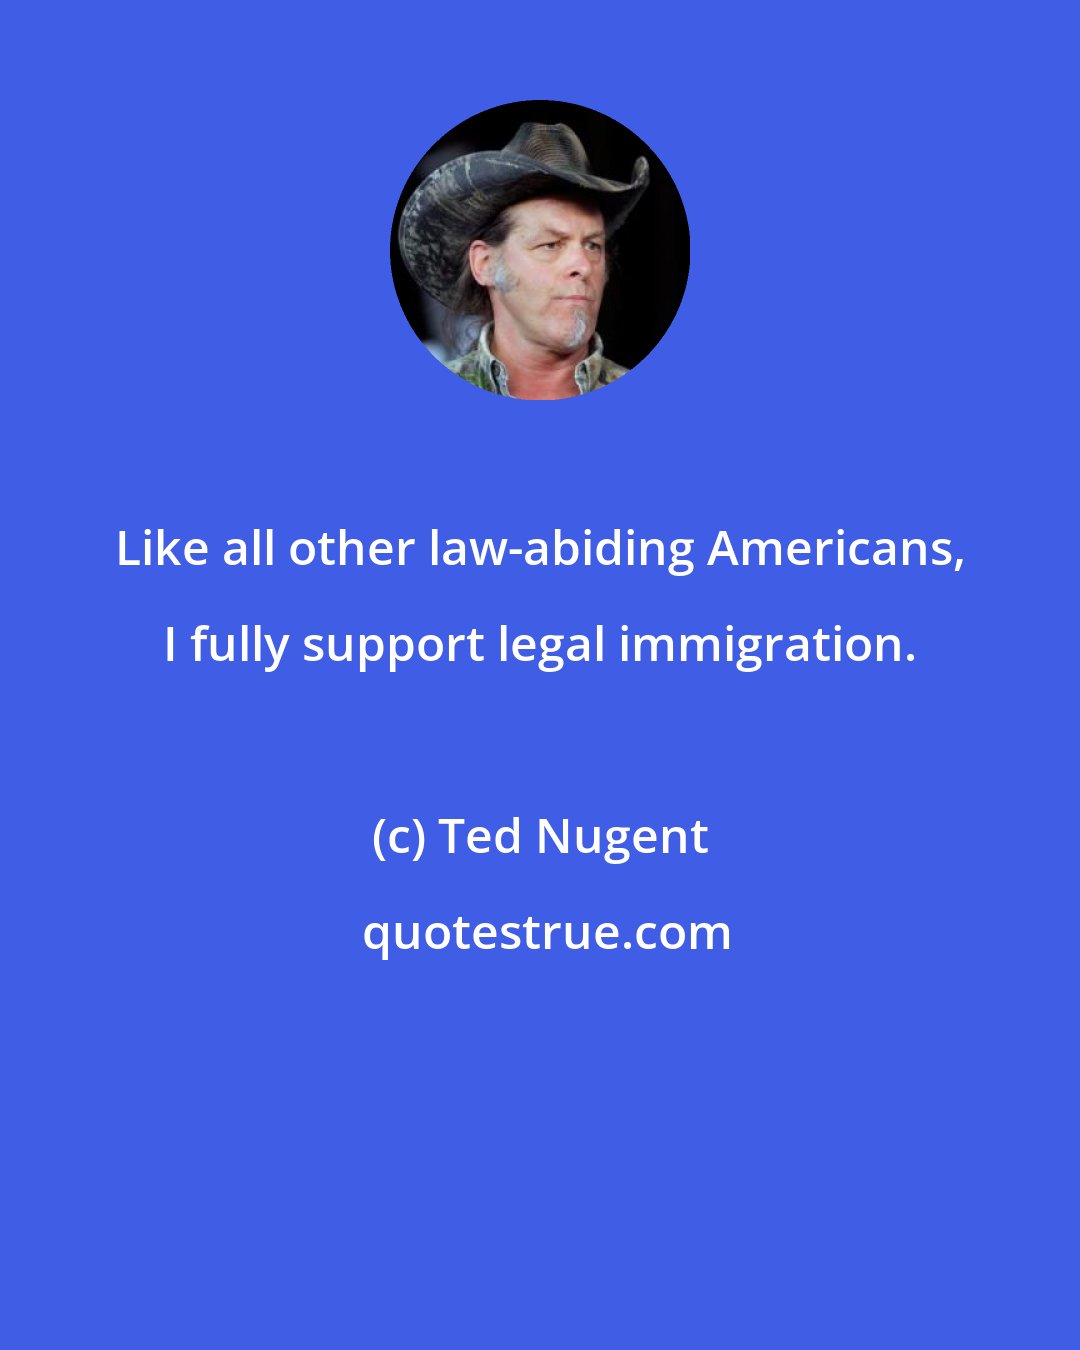 Ted Nugent: Like all other law-abiding Americans, I fully support legal immigration.